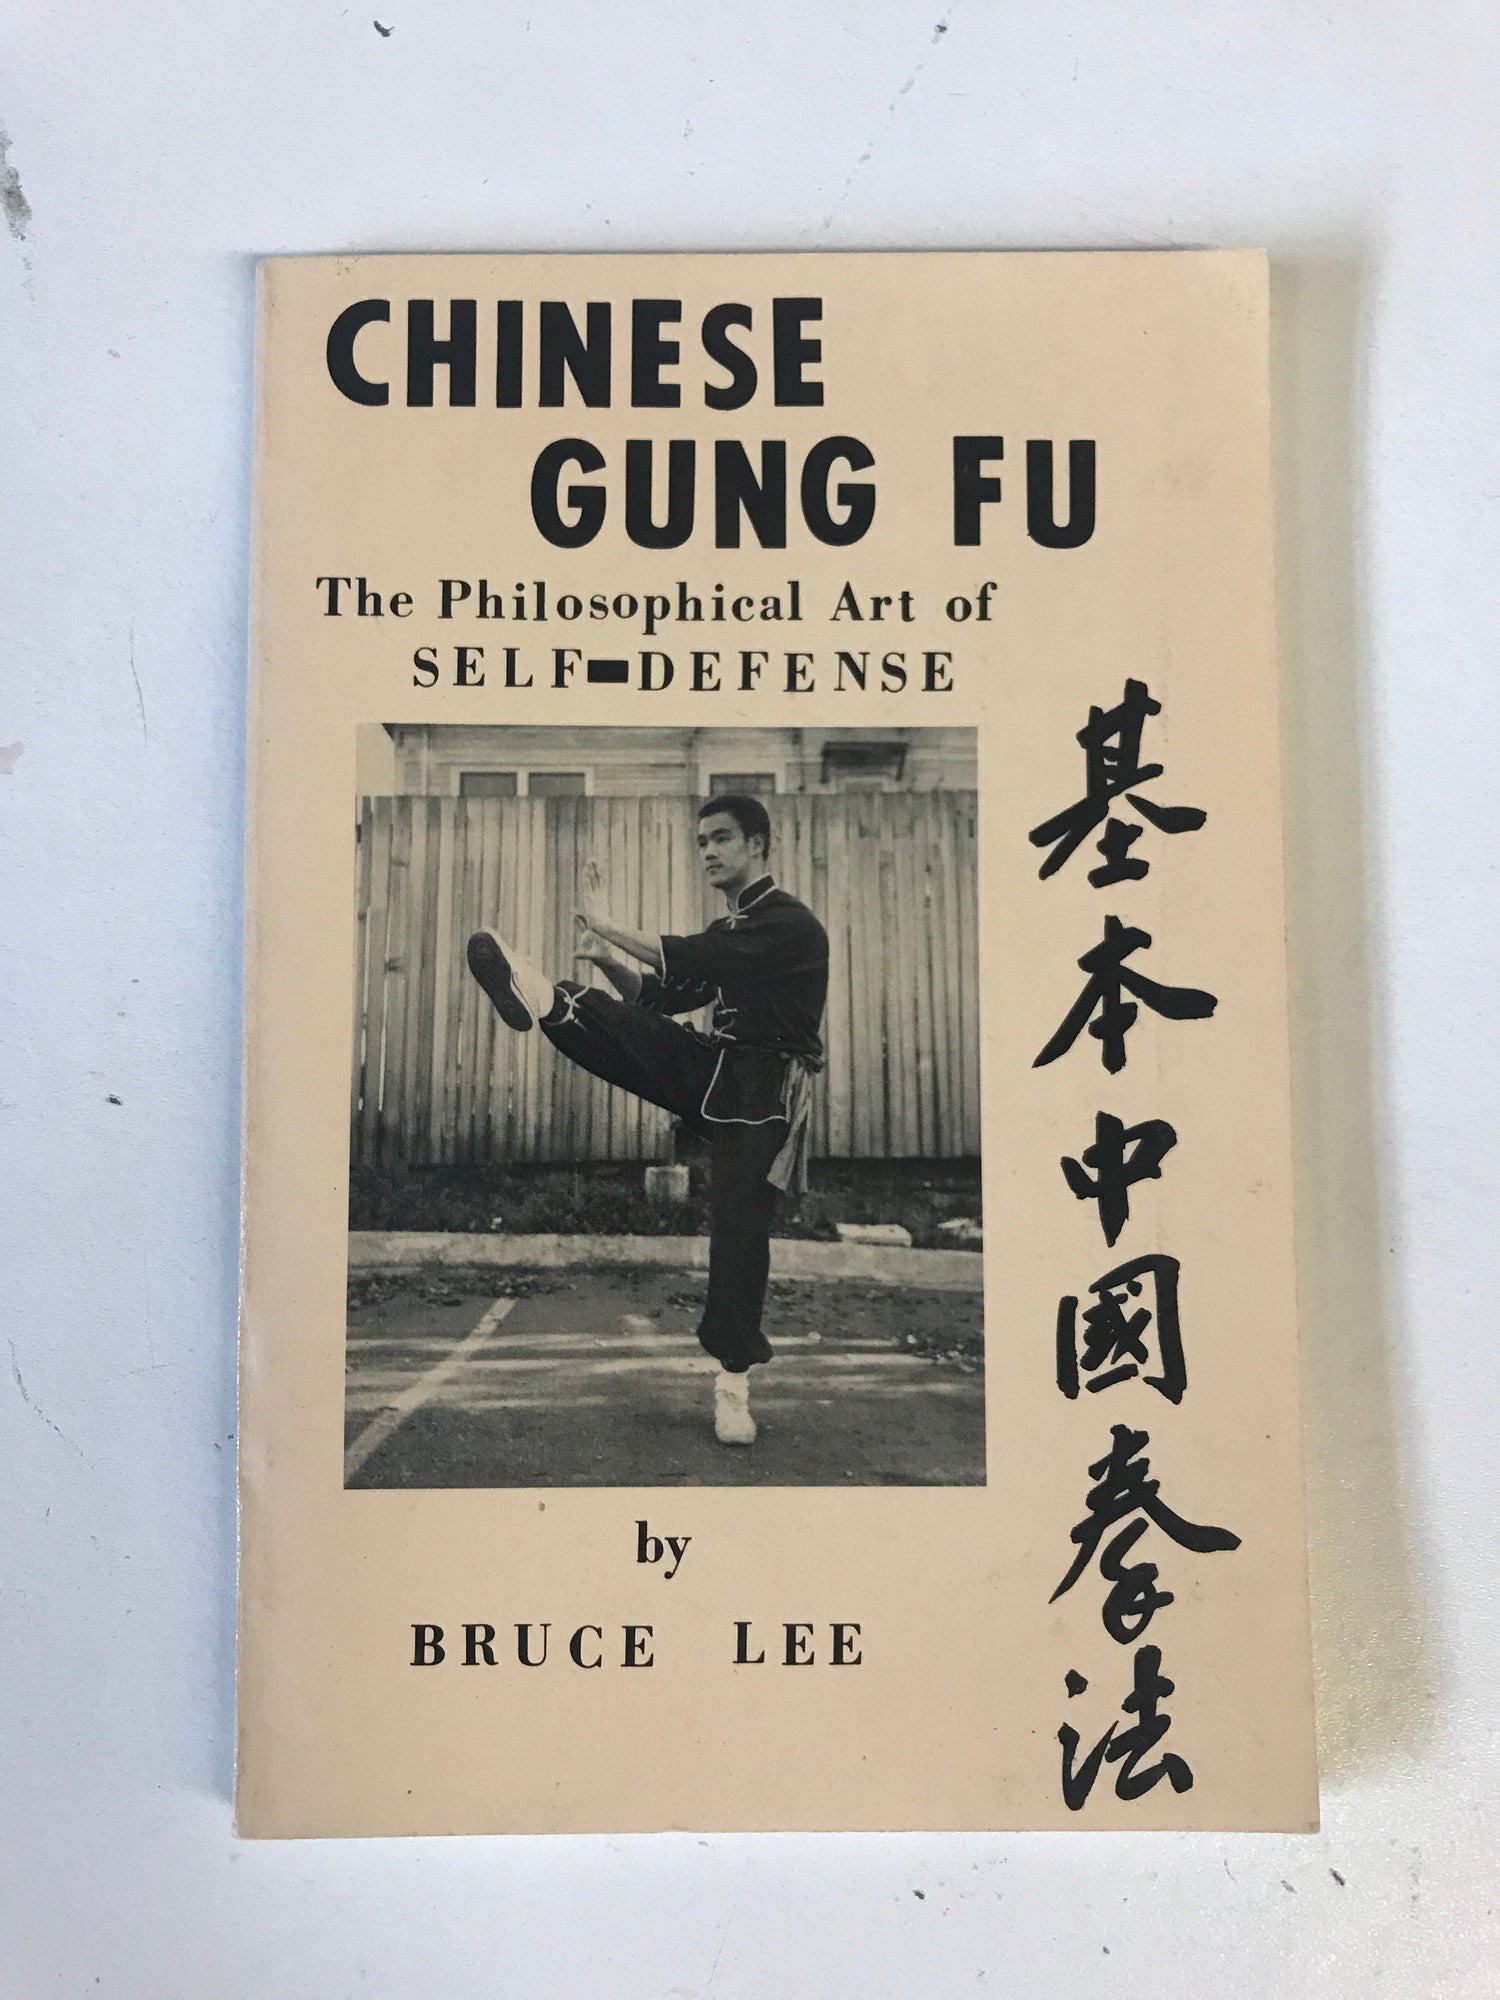 Chinese Gung Fu Philosophical Art of Self Defense Book by Bruce Lee (Preowned) - Budovideos Inc